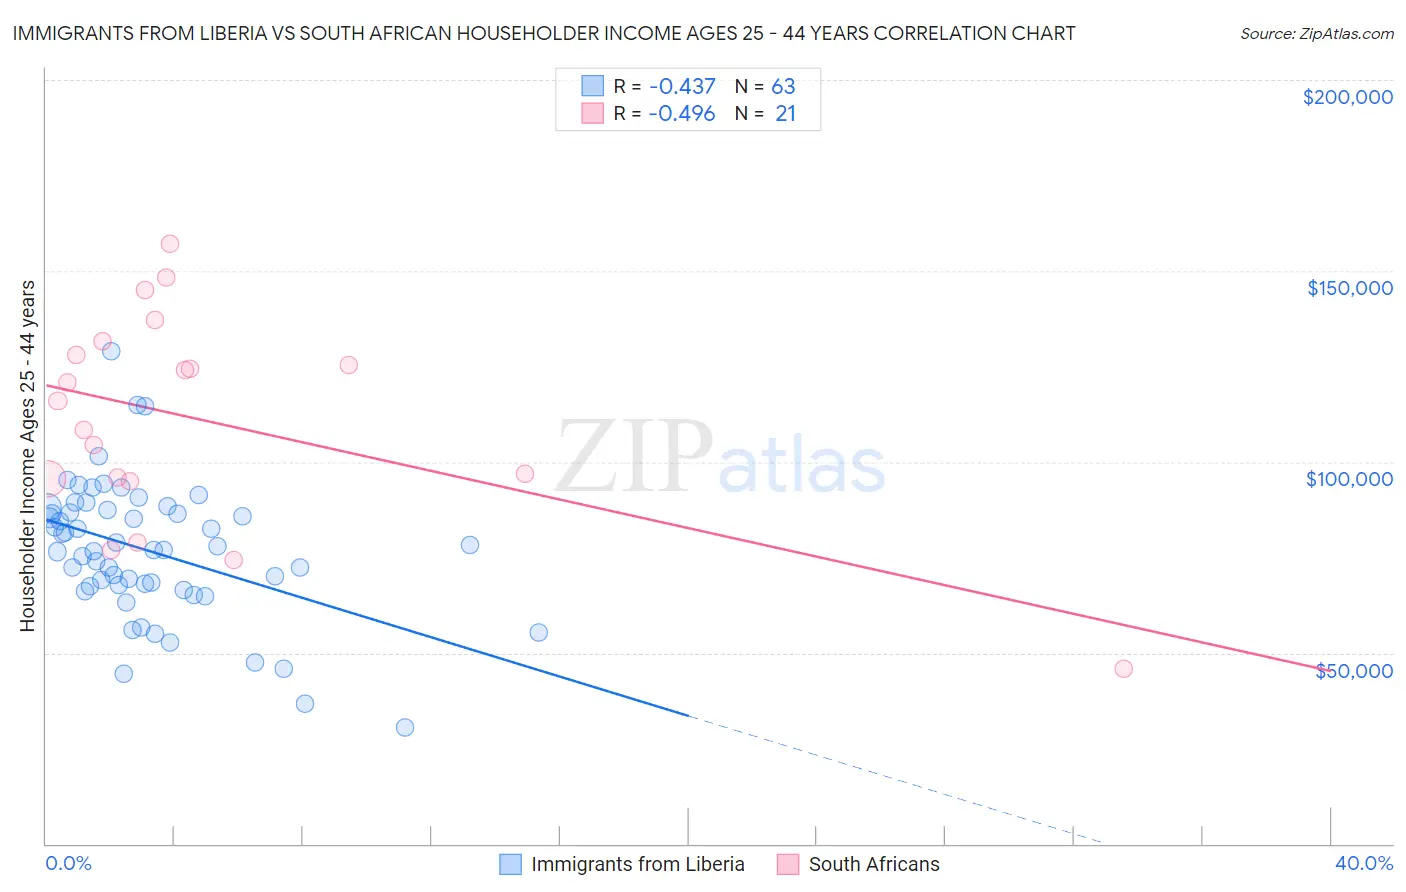 Immigrants from Liberia vs South African Householder Income Ages 25 - 44 years